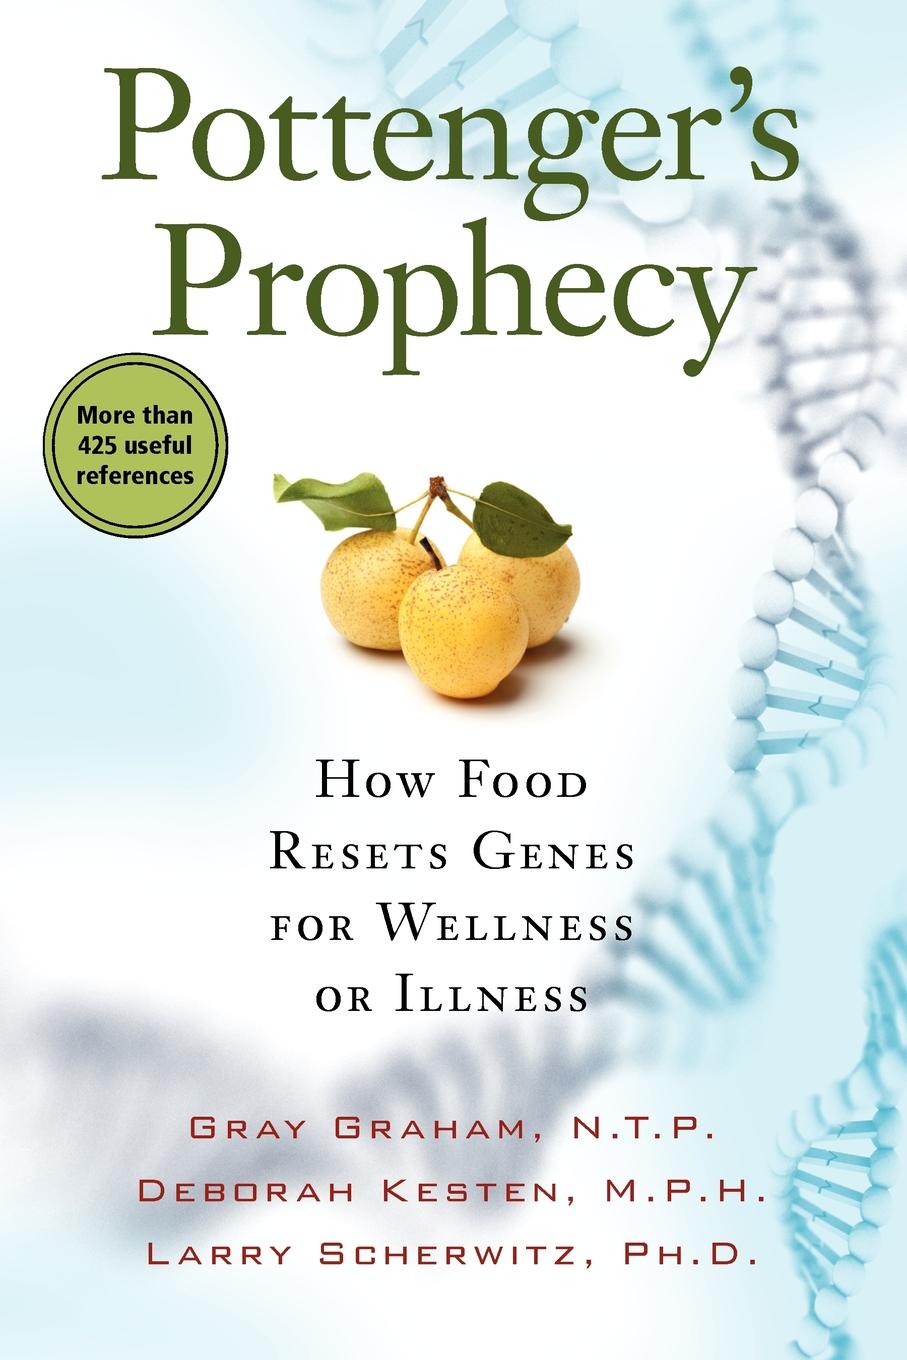 Pottenger`s Prophecy. How Food Resets Genes for Wellness or Illness